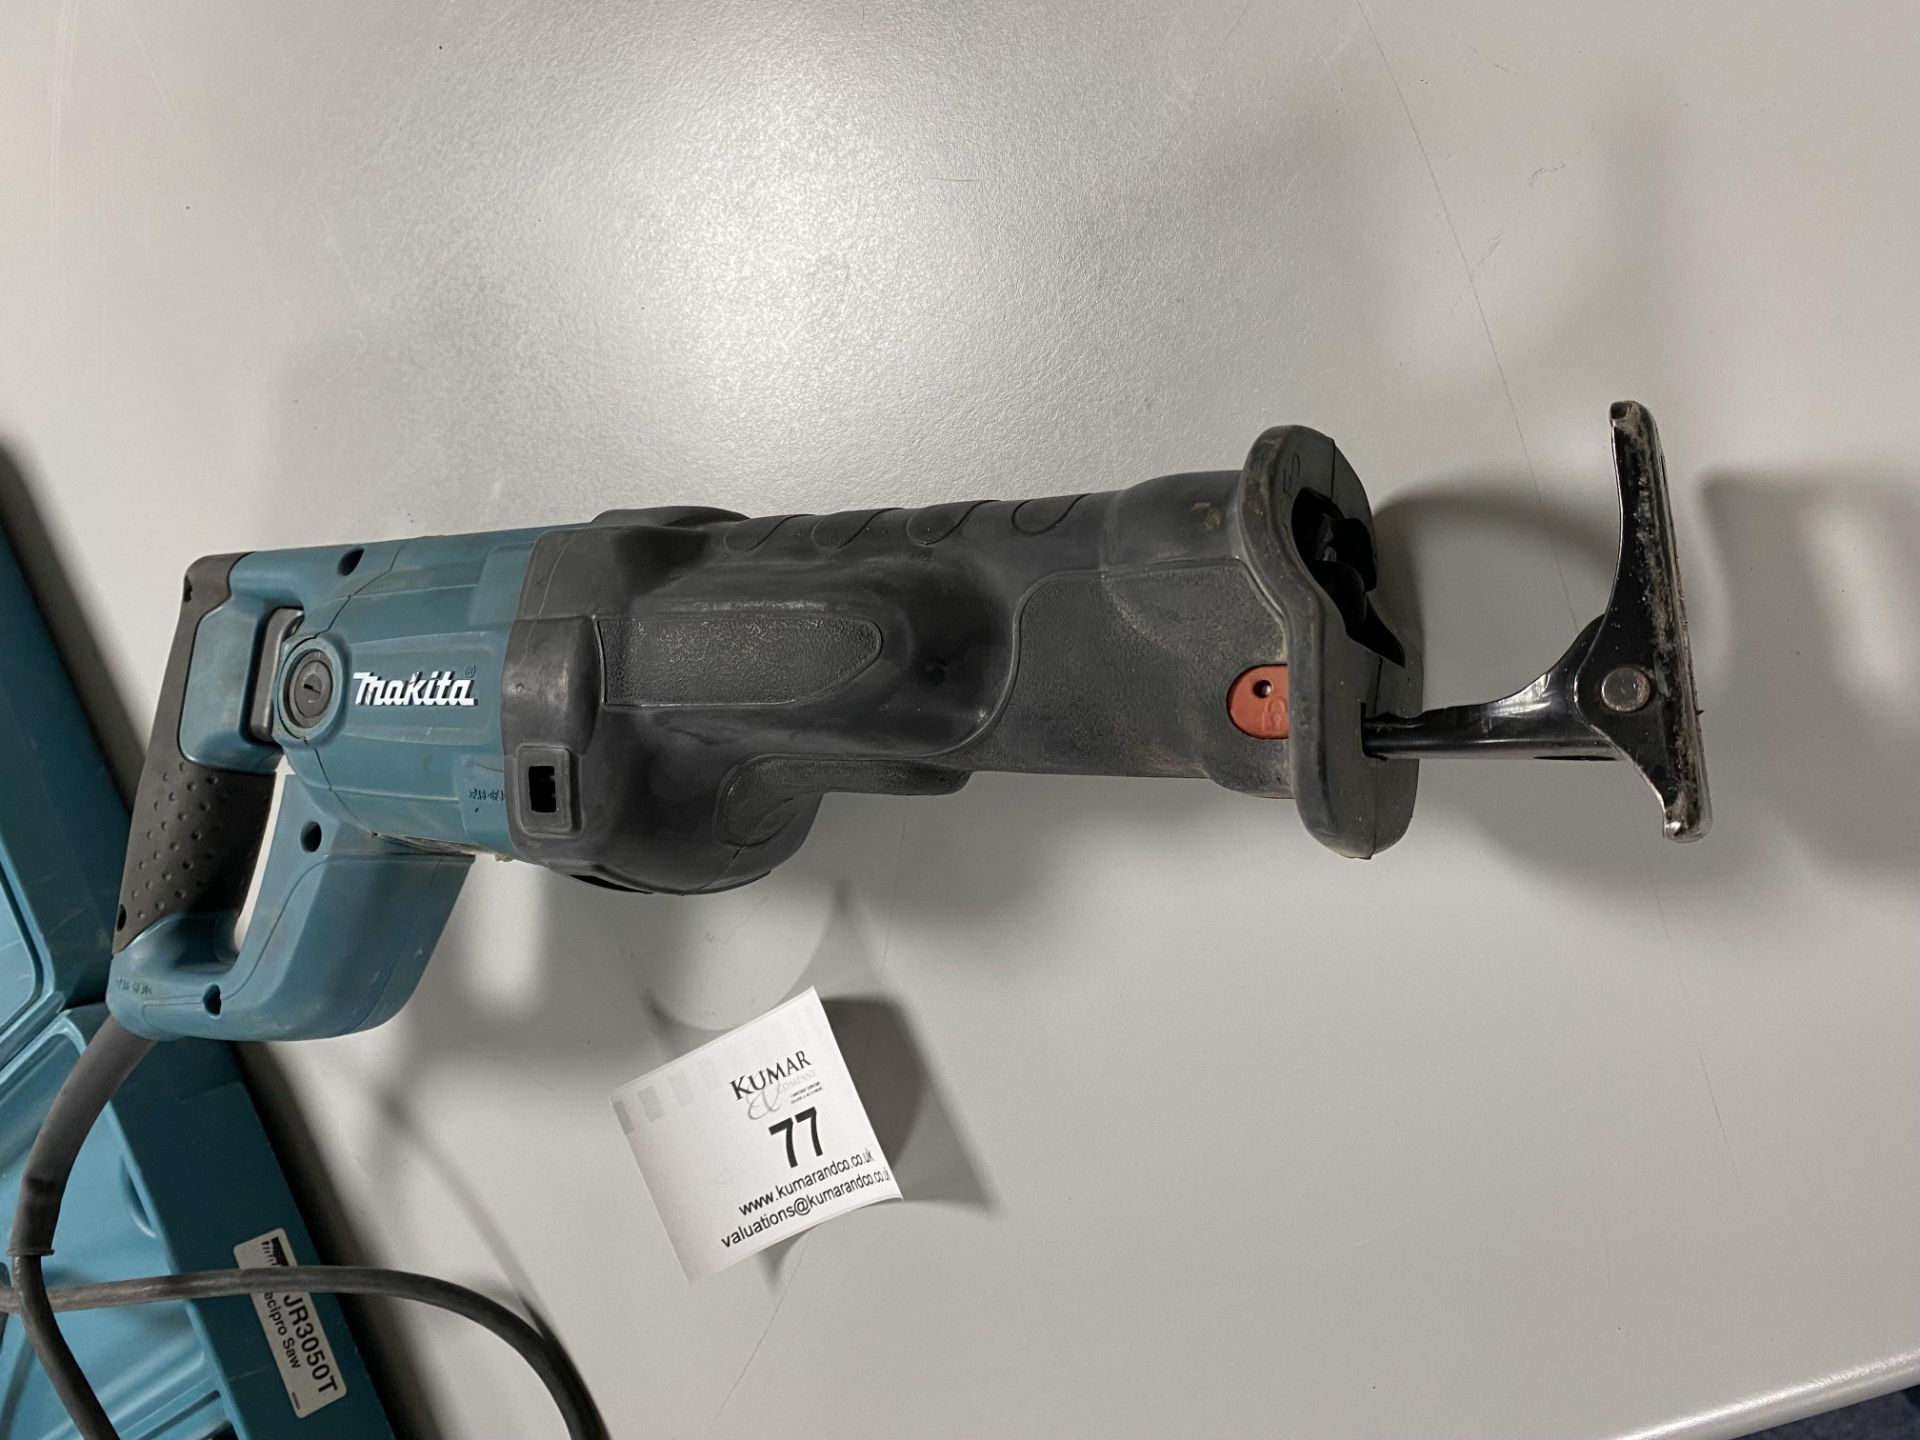 Makita JR3050T 110v Reciprocating Saw with assorted blades and Carry Case as Shown - Image 4 of 7